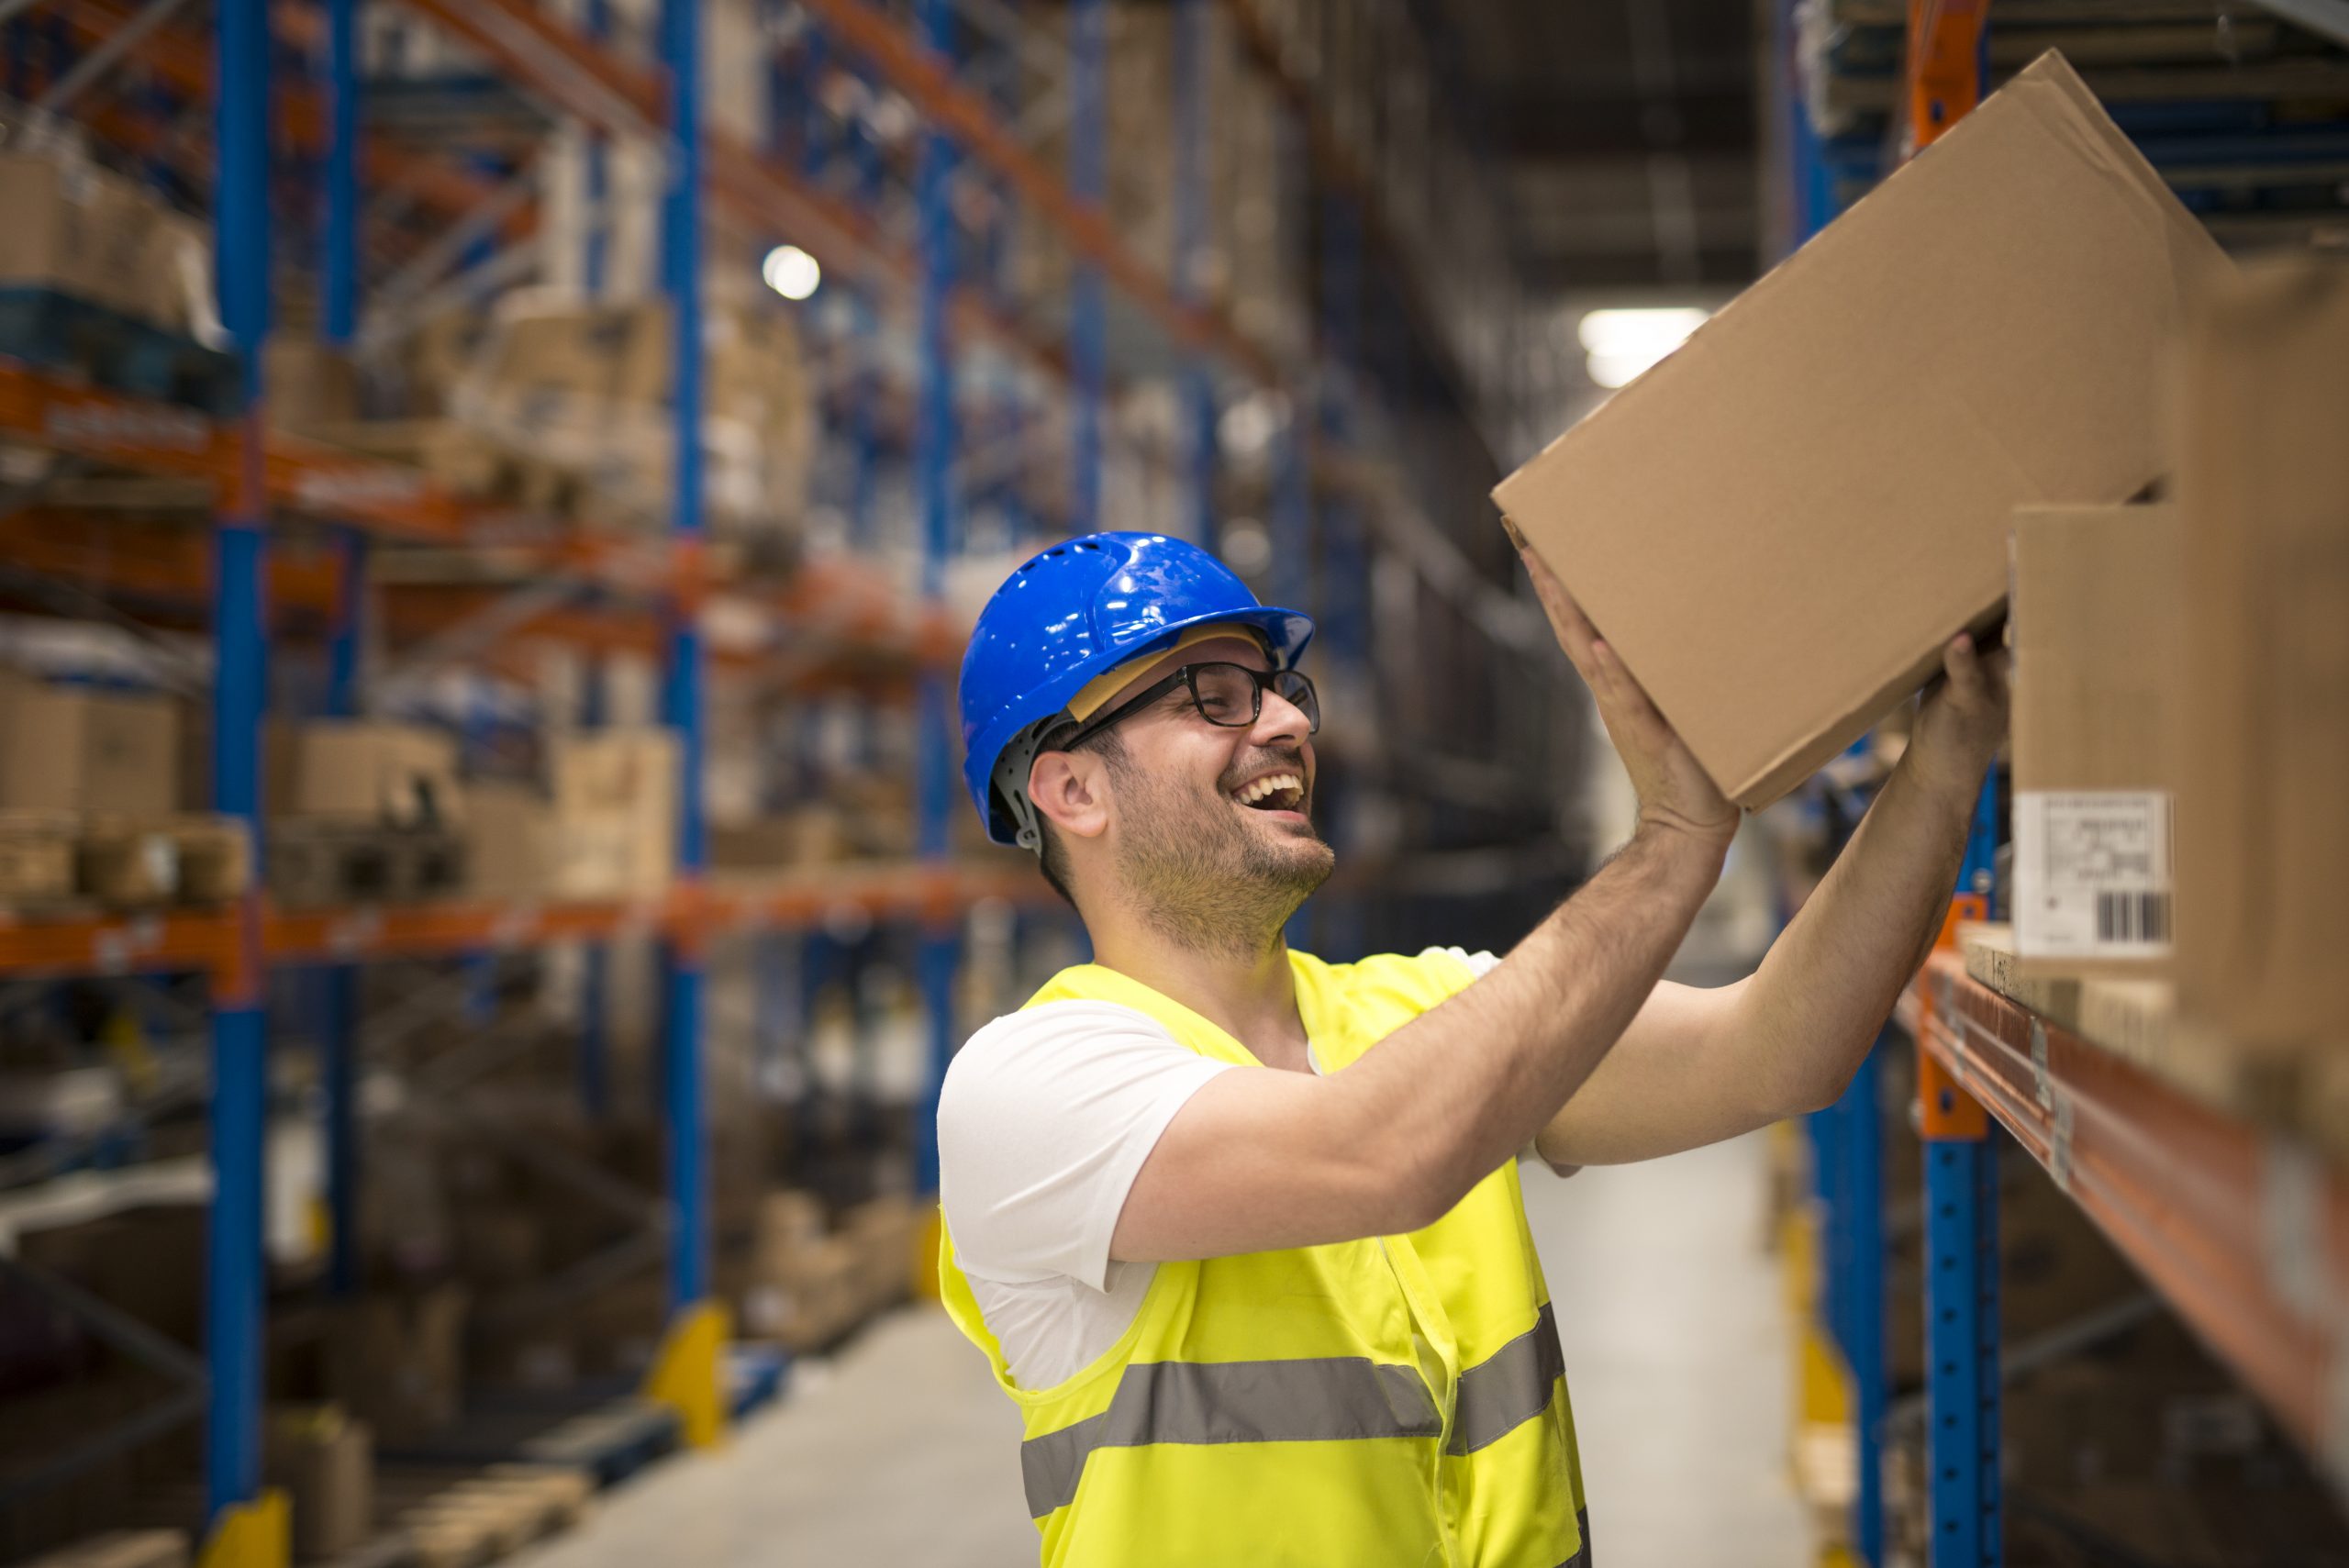 Smiling warehouse worker moving boxes on the shelf.